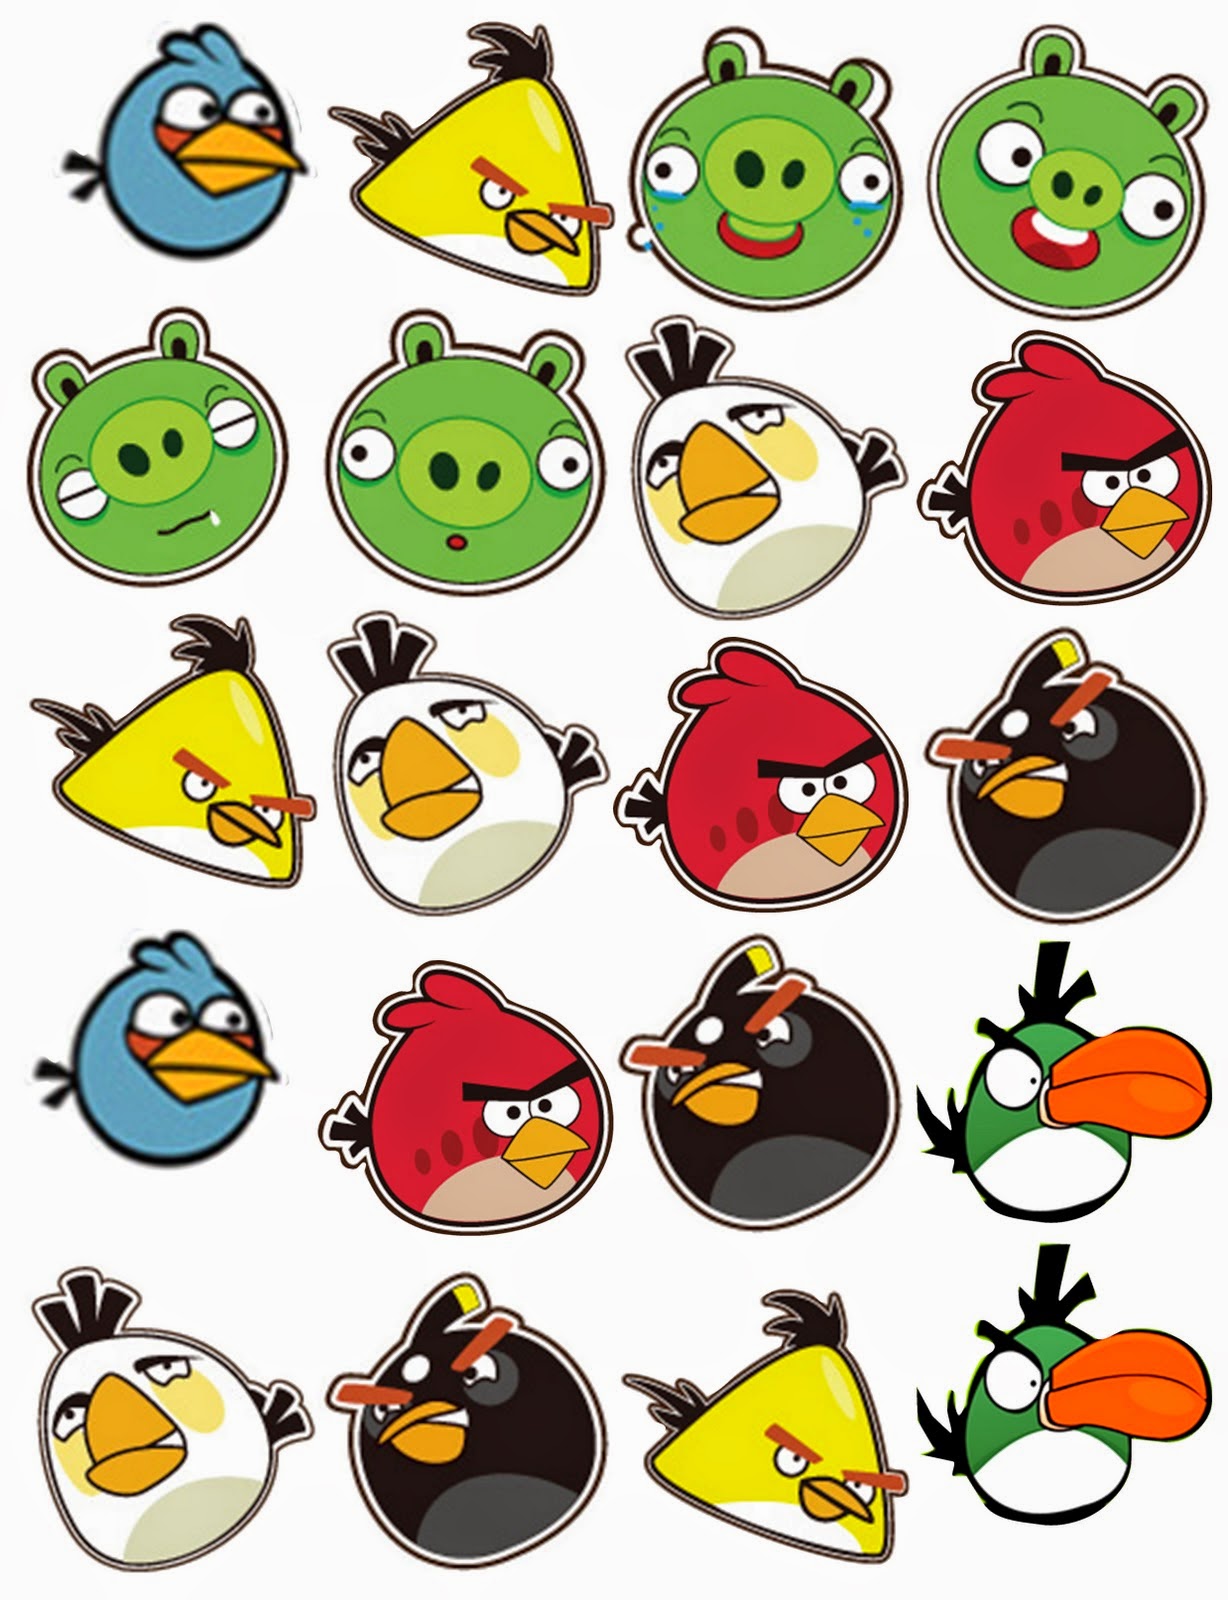 Template Angry Bird new